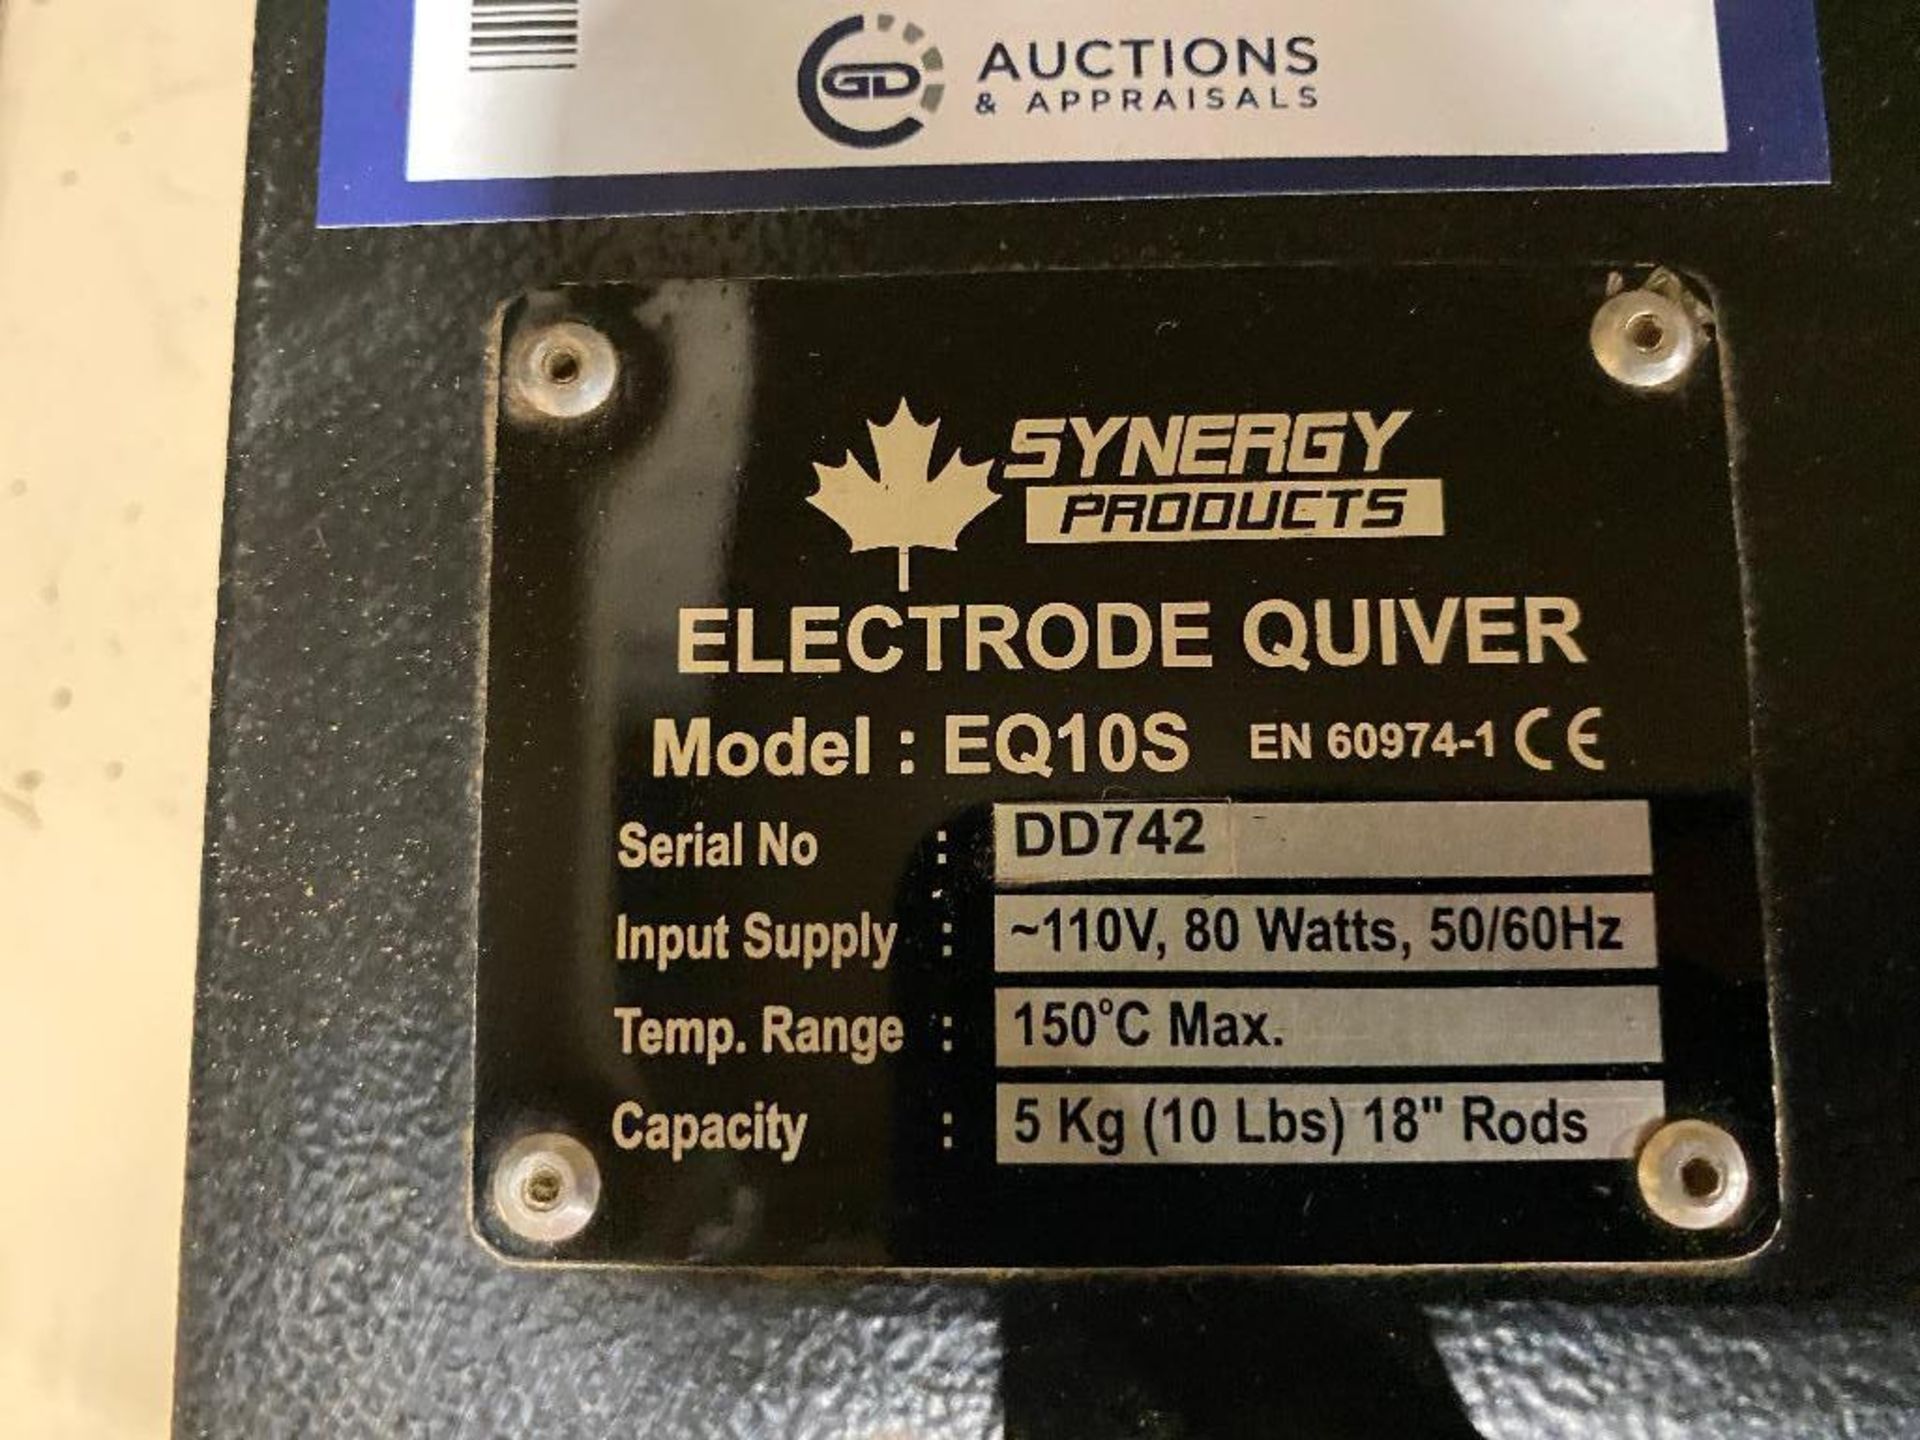 Synergy Products EQ10S Electrode Quiver - Image 2 of 2